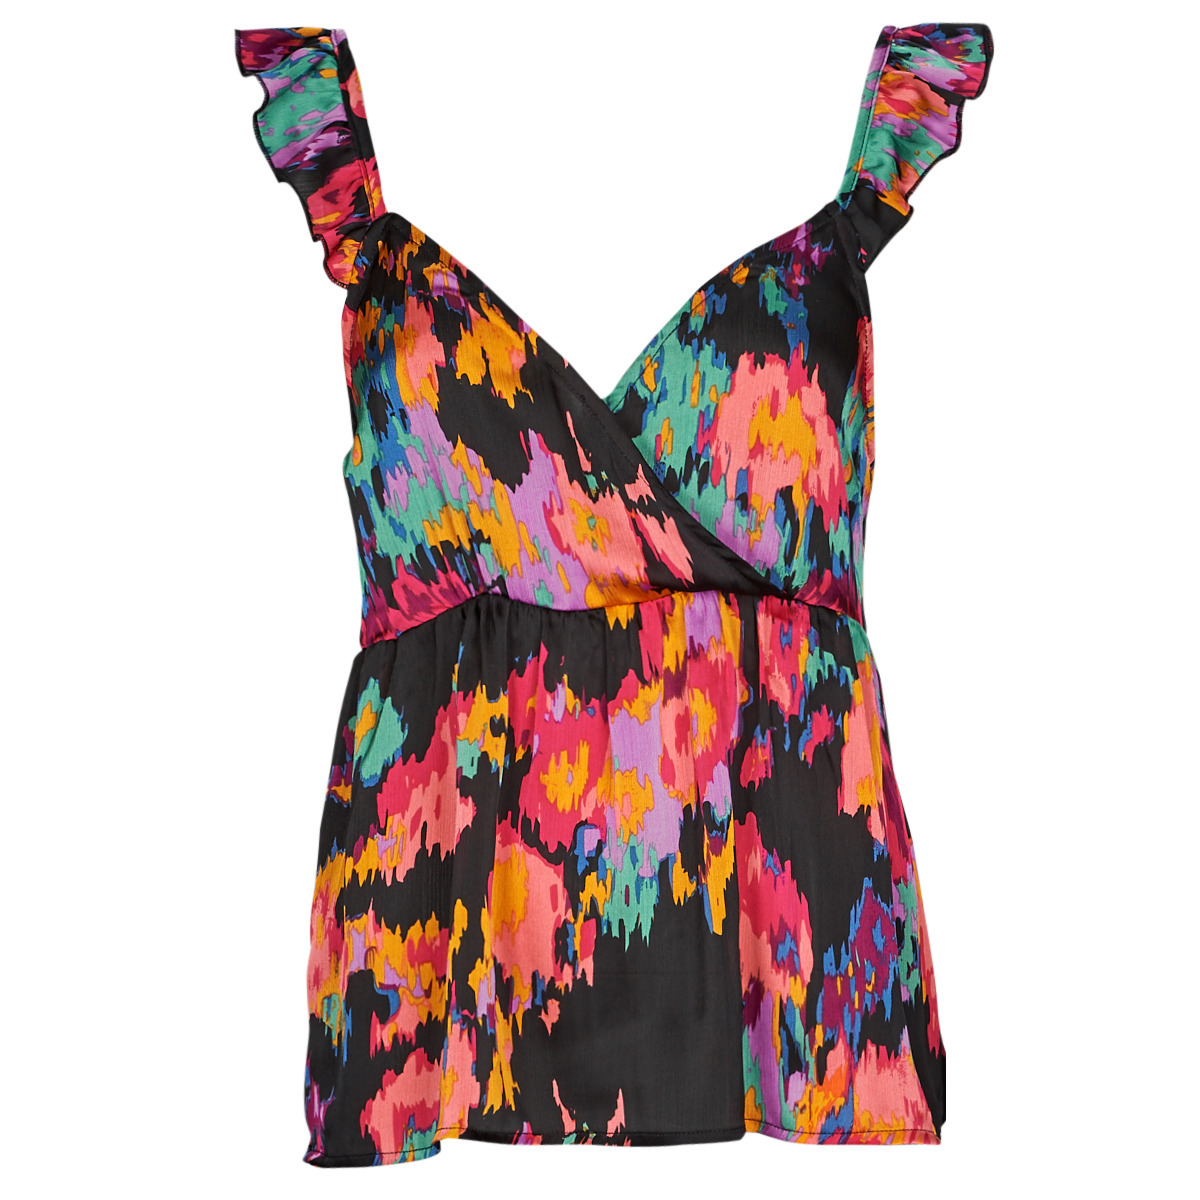 Spartoo Woman Multicolor Blouse by Betty London GOOFASH